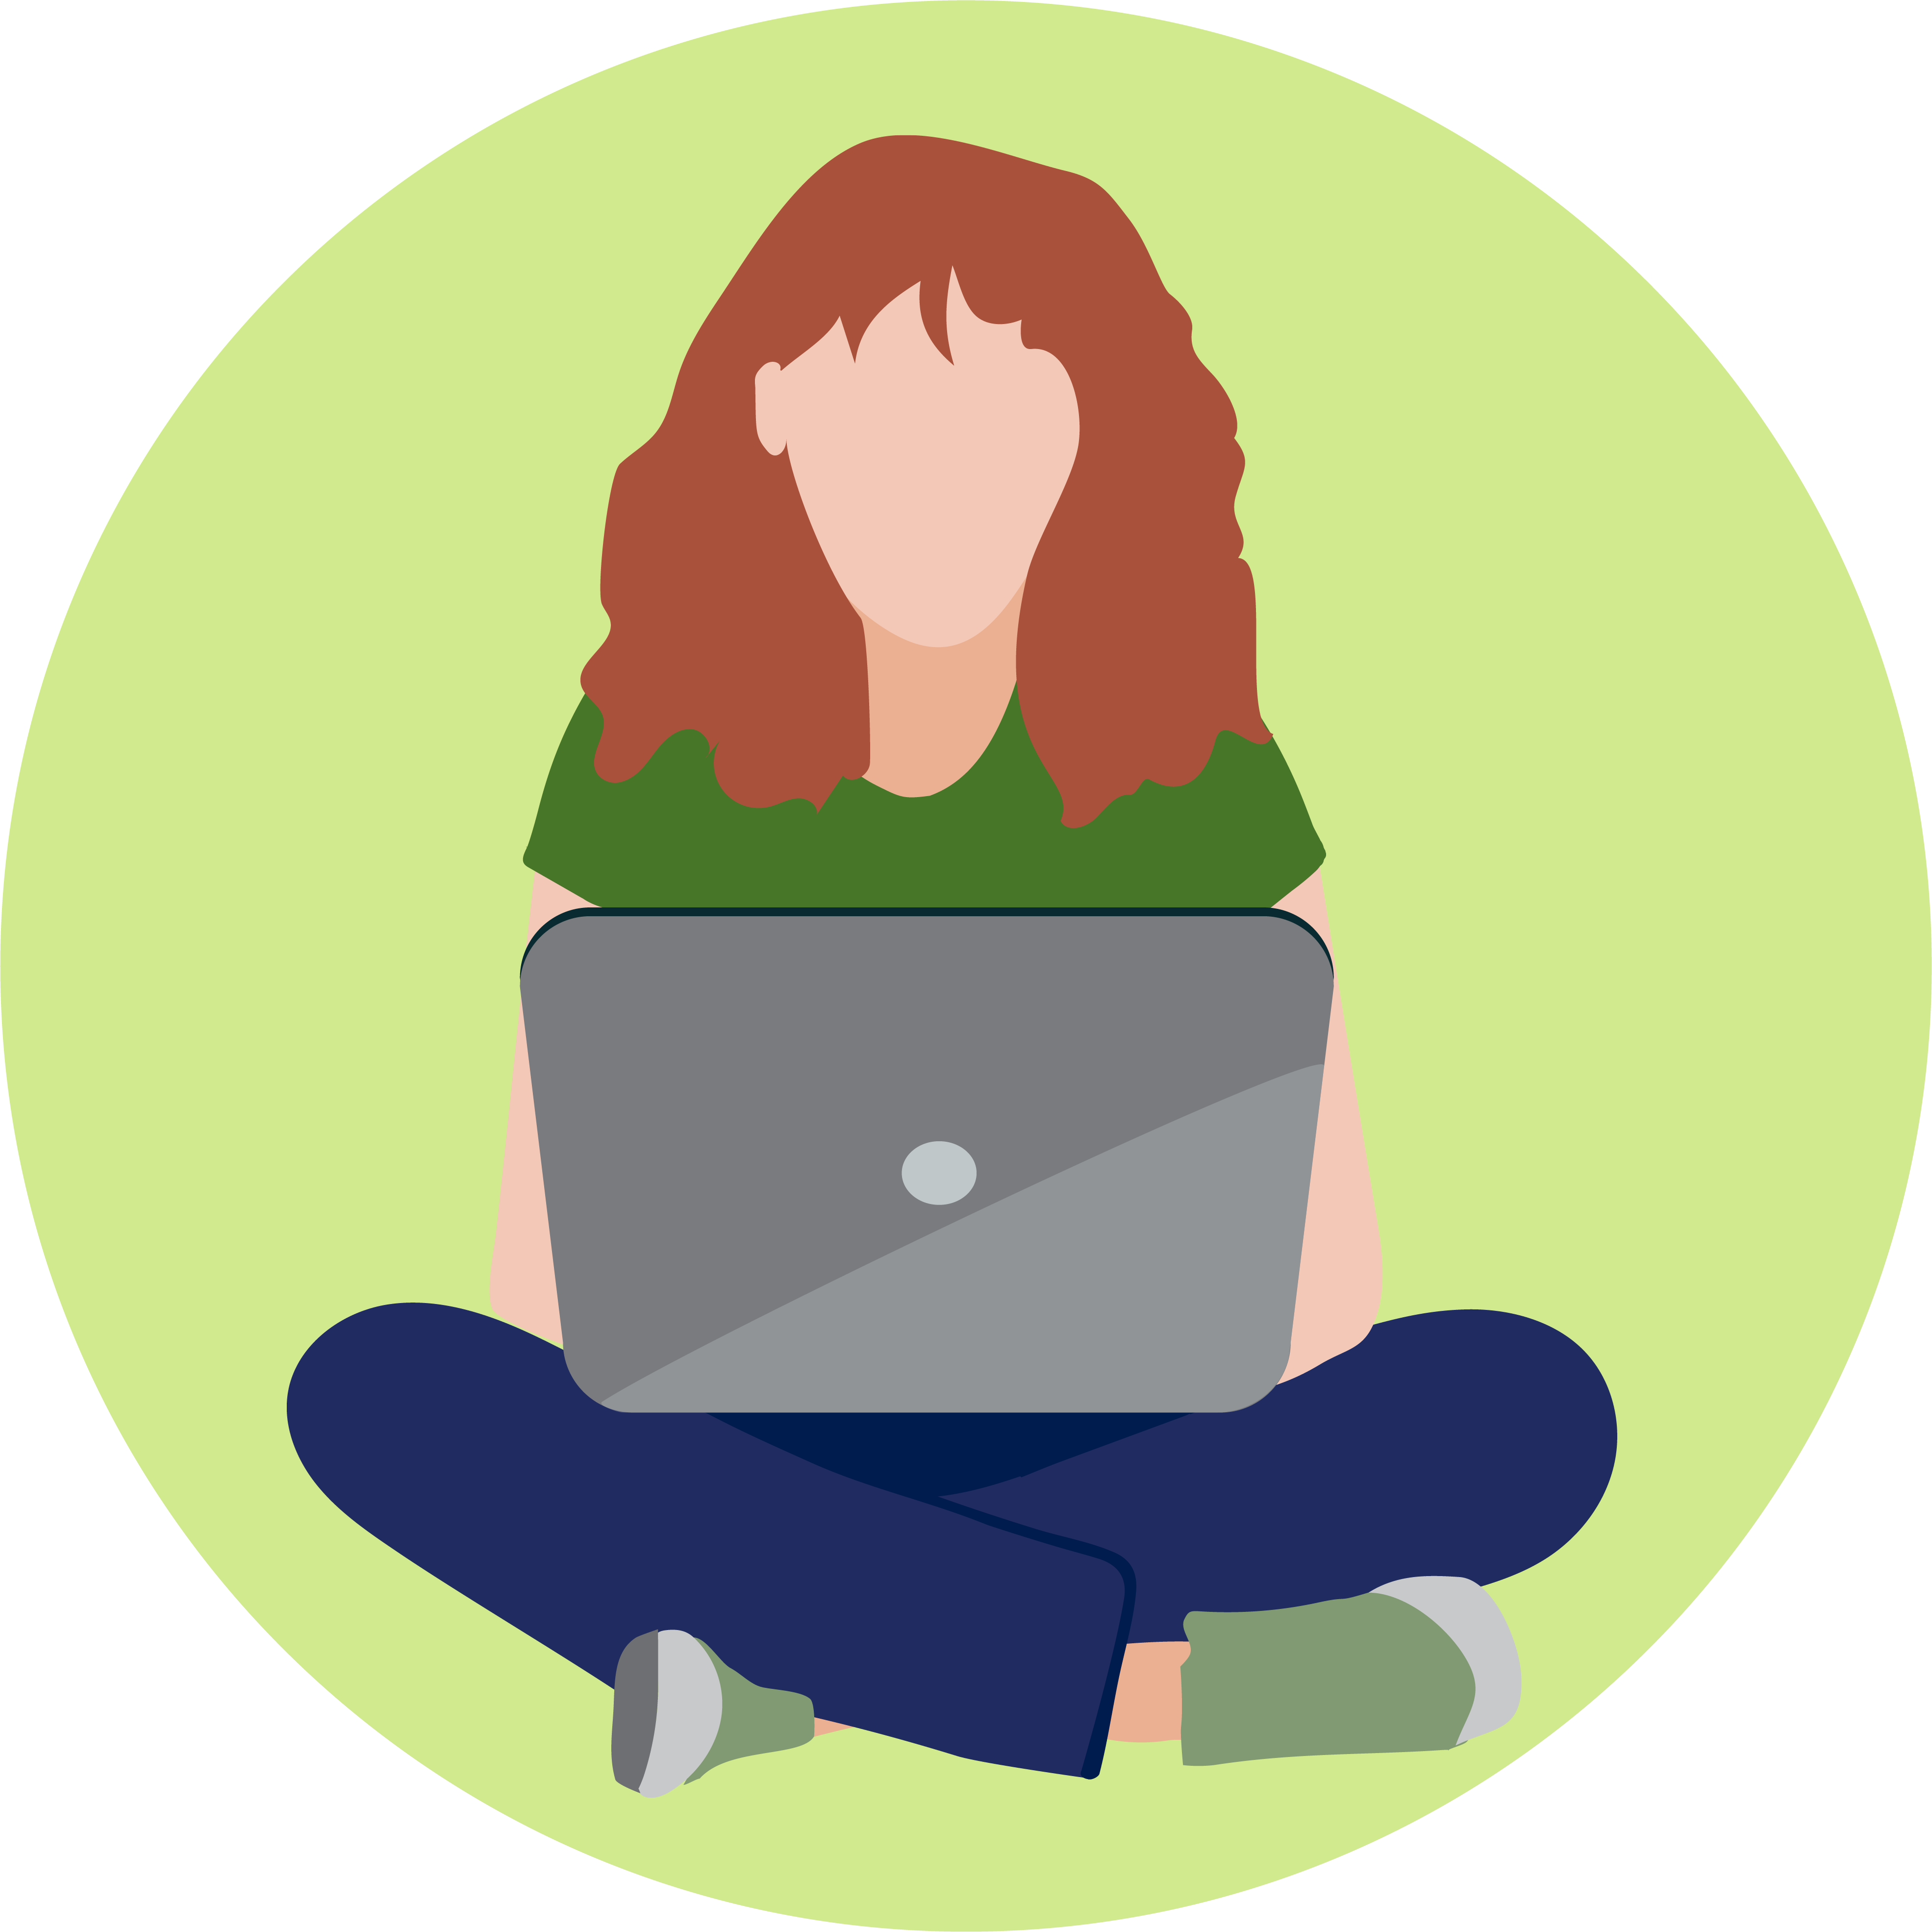 A woman with red hair sits cross legged, working on her laptop.